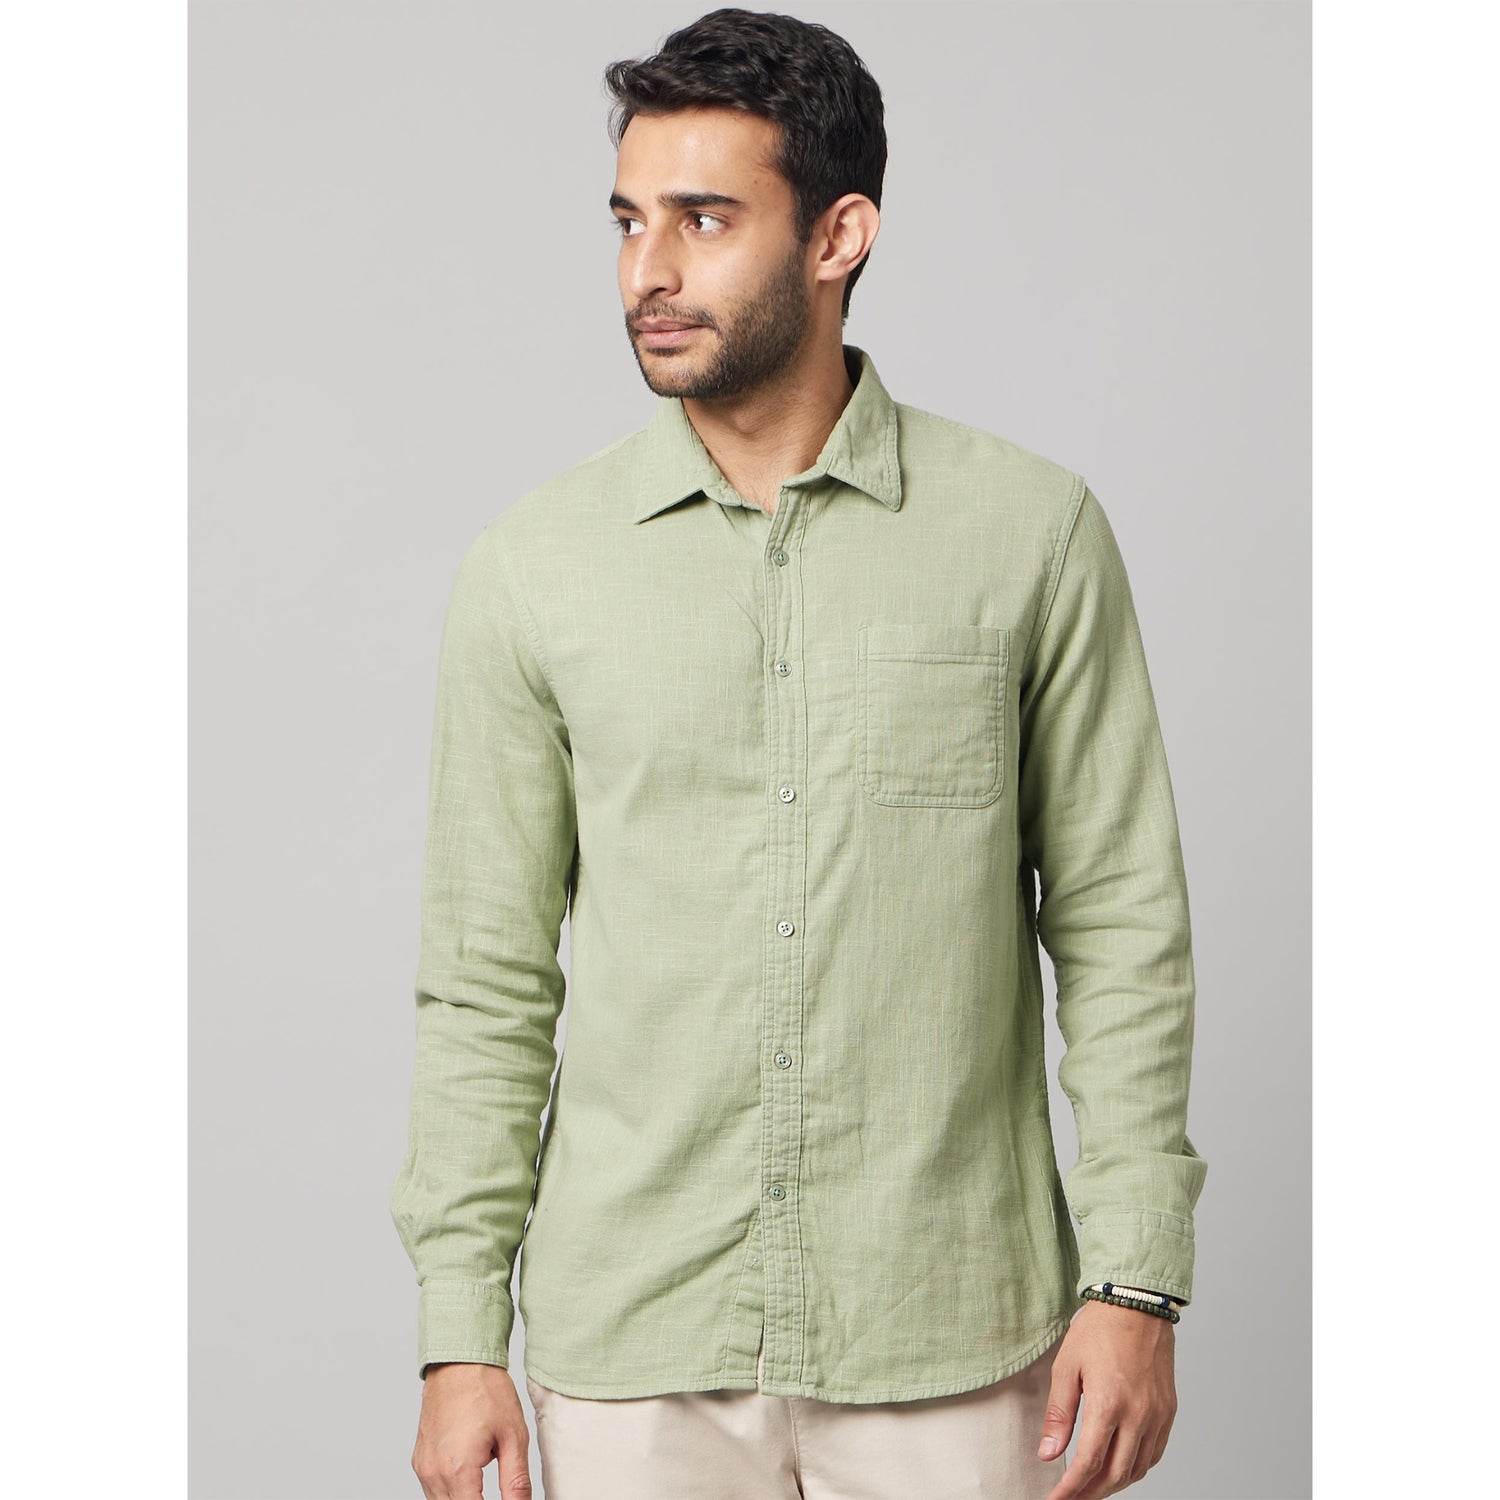 Green Classic Spread Collar Breathable Relaxed Cotton Casual Shirt (DADOUBLE)